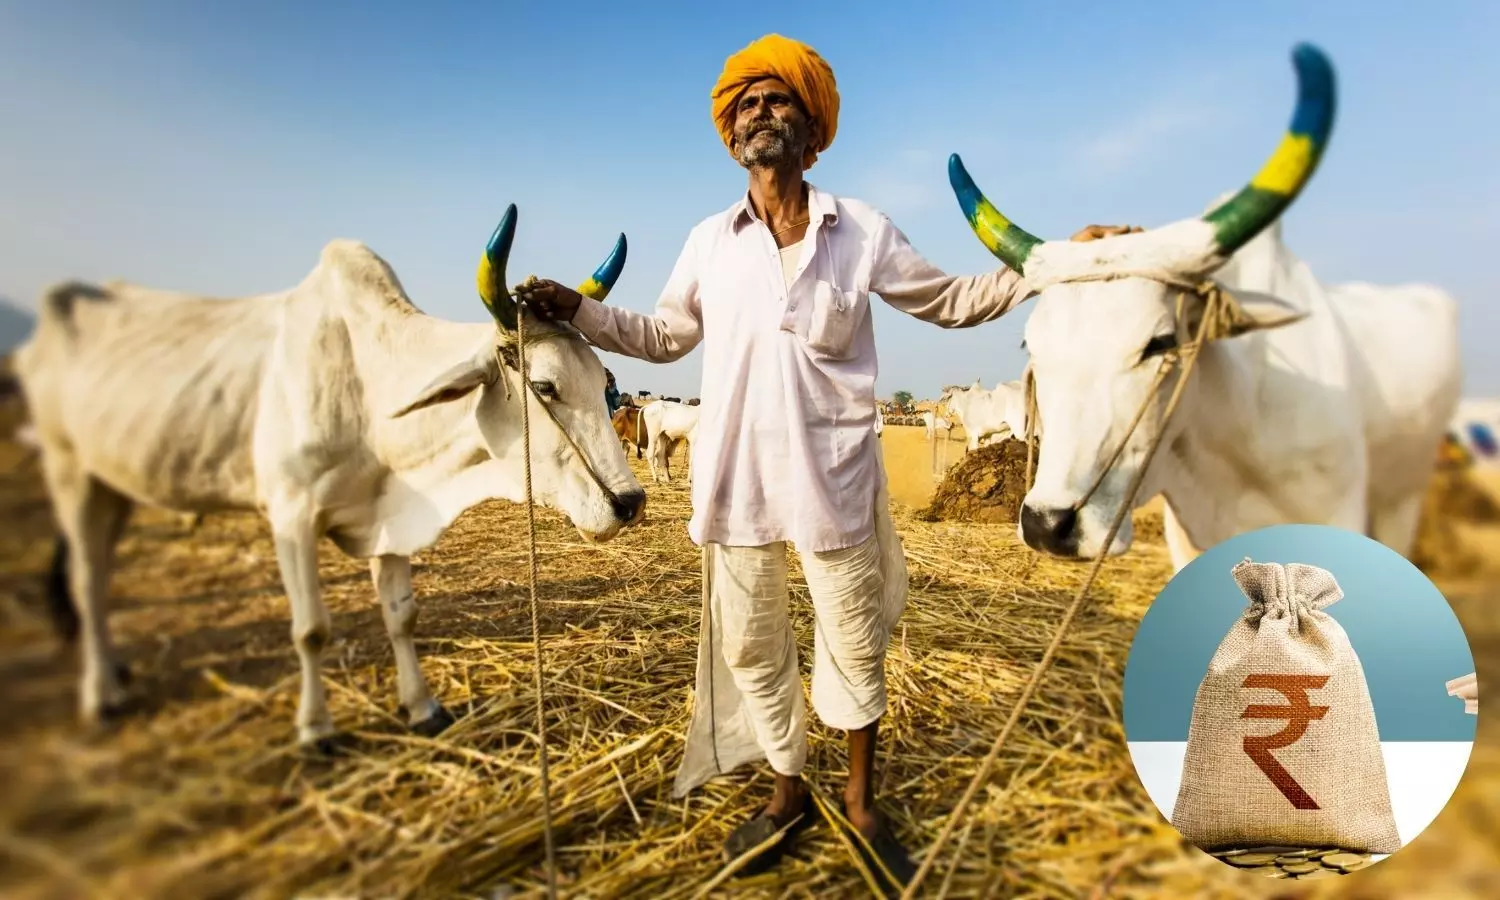 Indian farmer with his two bulls, Rupee sack